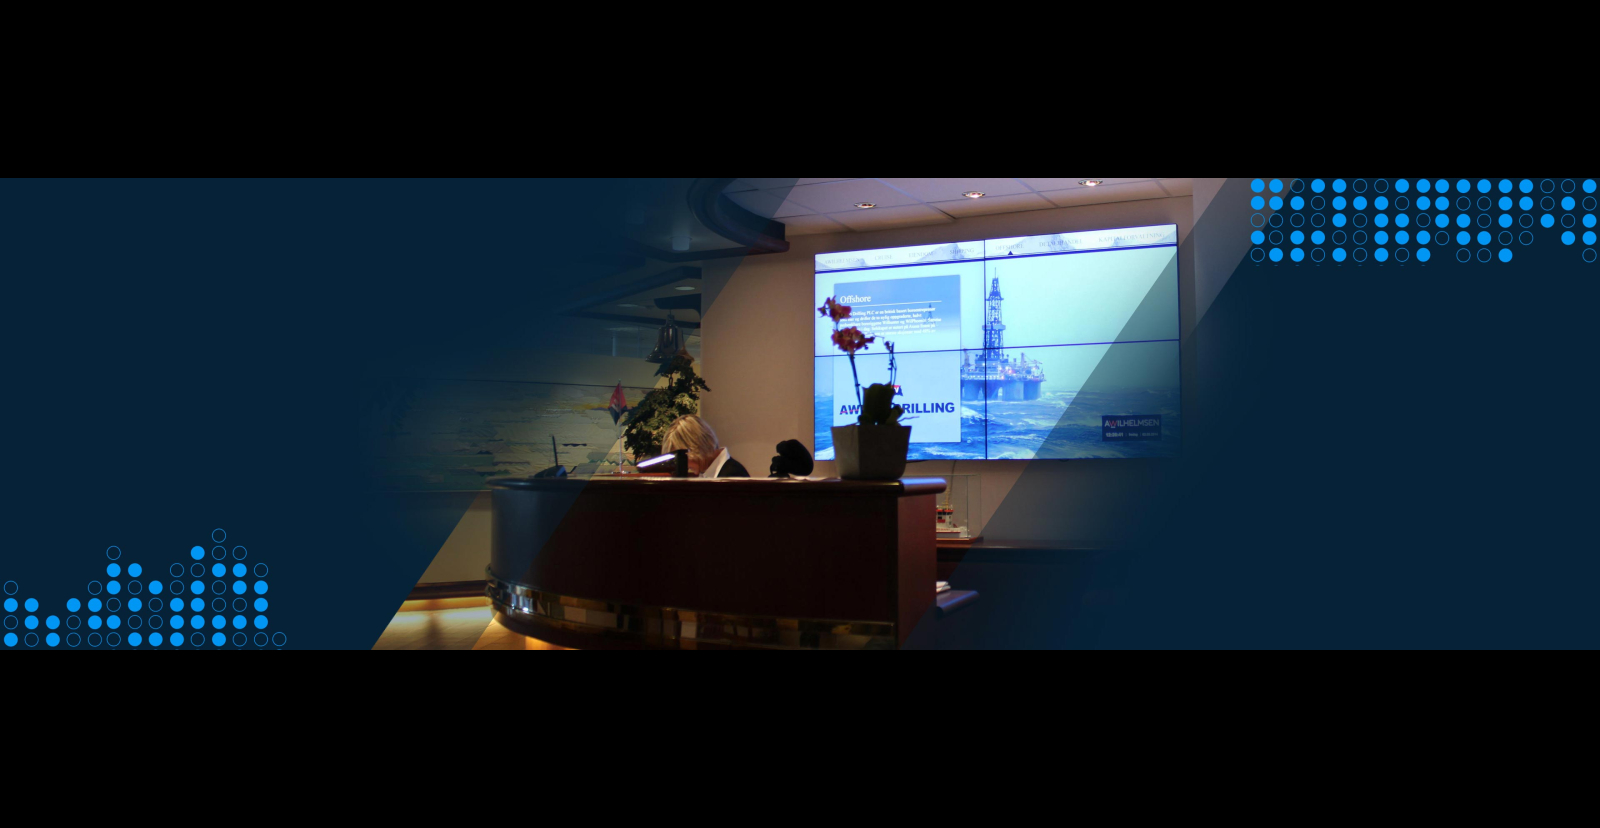 A corporate reception desk with digital signage behind